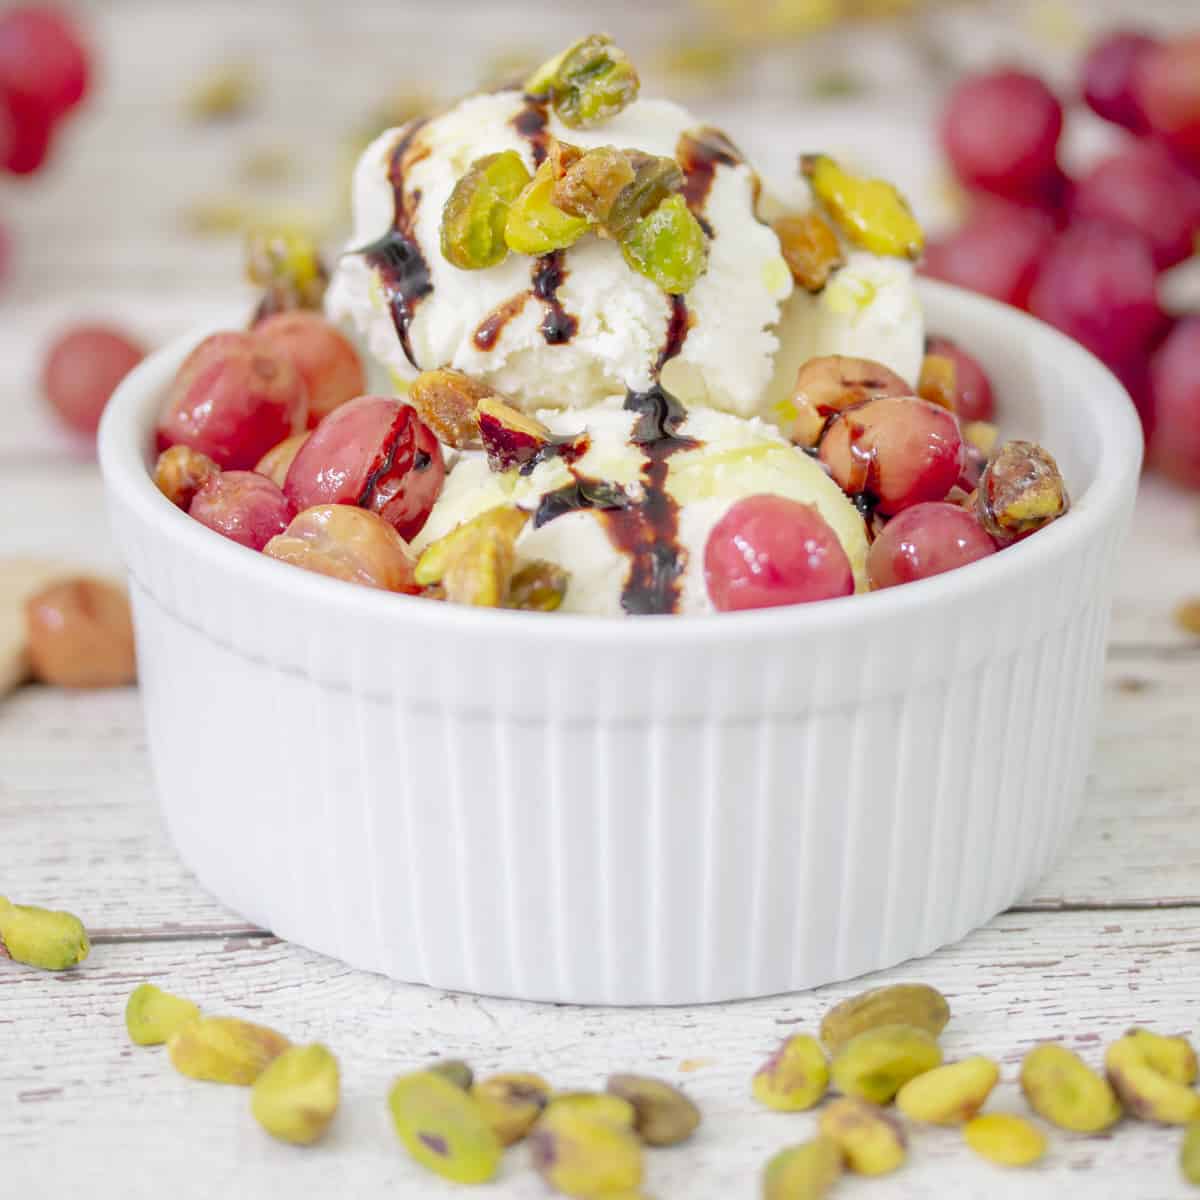 Ice Cream Sundae with Grapes and Pistachios